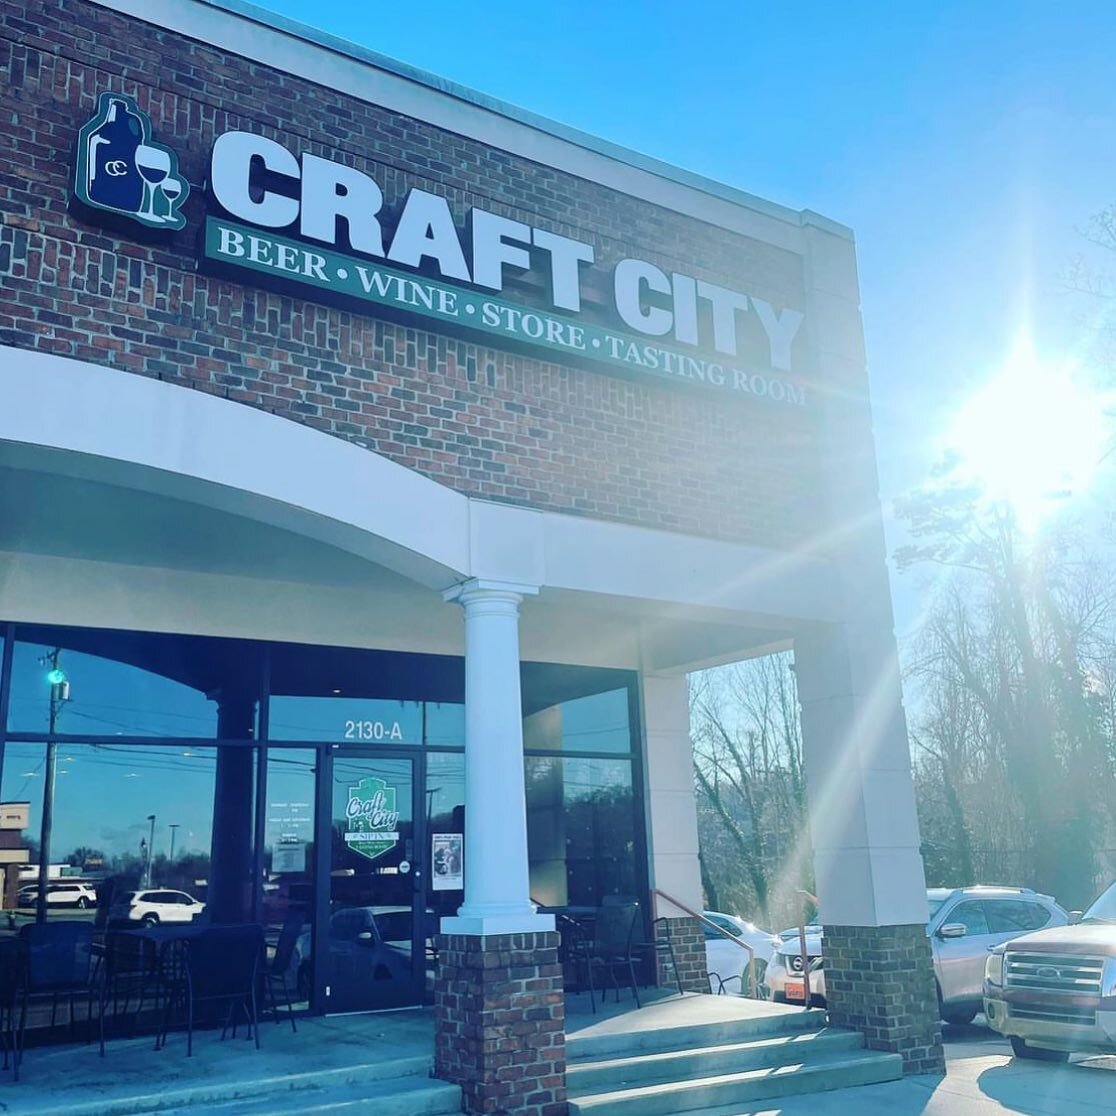 Come to Craft City tonight to enjoy some good music, good beer, and good food! We&rsquo;ll be there till 9:30! 🍻 🌮 🎶 

@craftcitysipin